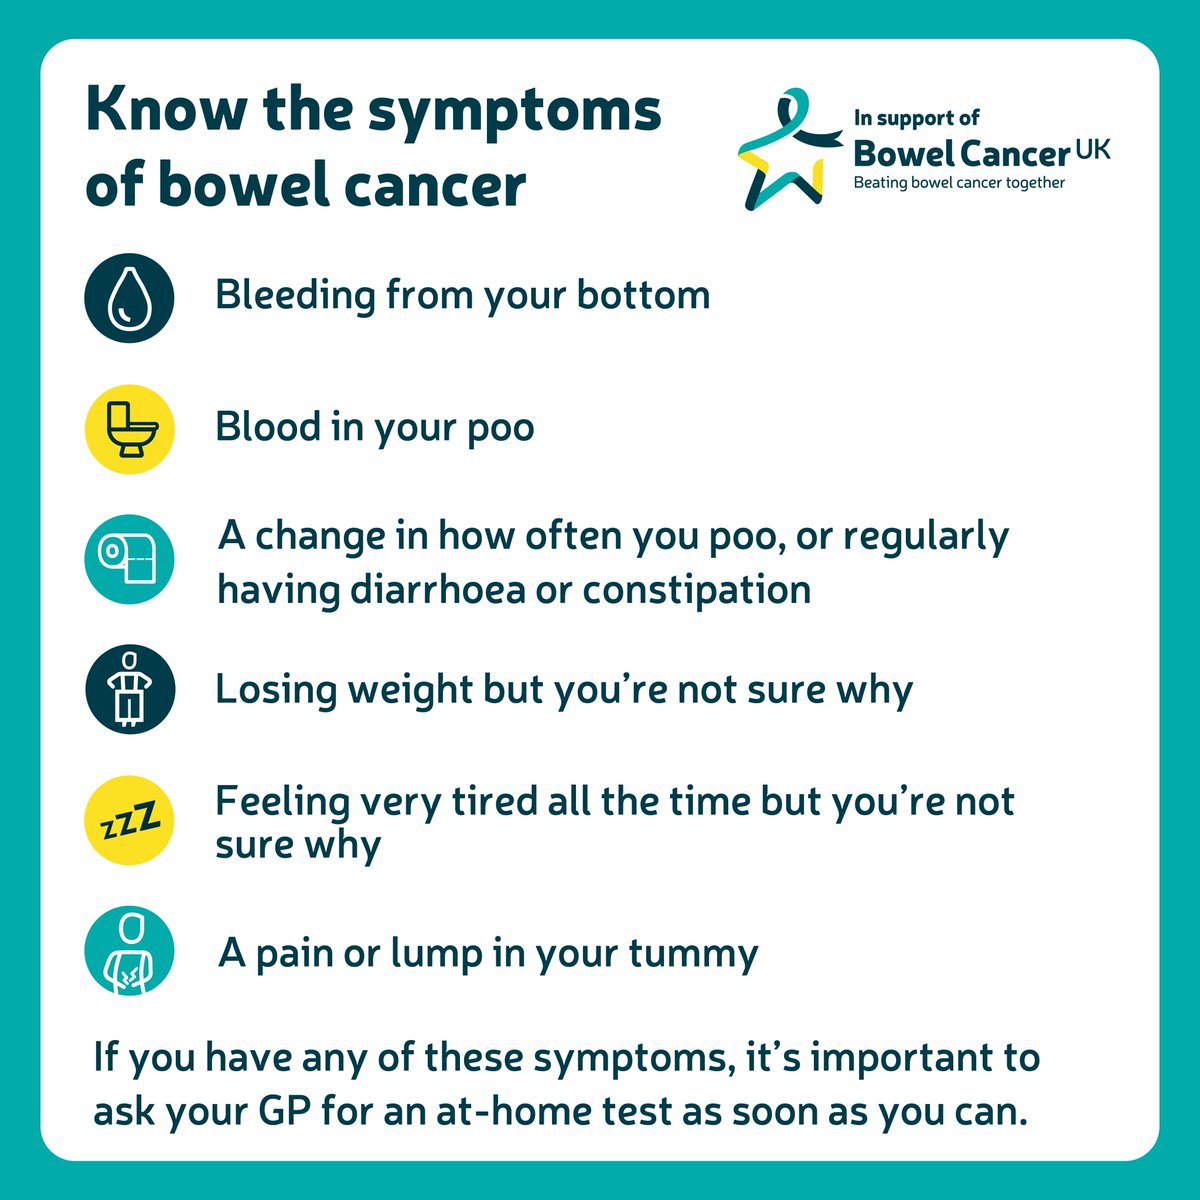 This #BowelCancerAwarenessMonth, @bowelcanceruk want you to know this #OneThing – the earlier the disease is spotted, the more treatable it’s likely to be. Find out more ➡️ bit.ly/3U5f0io